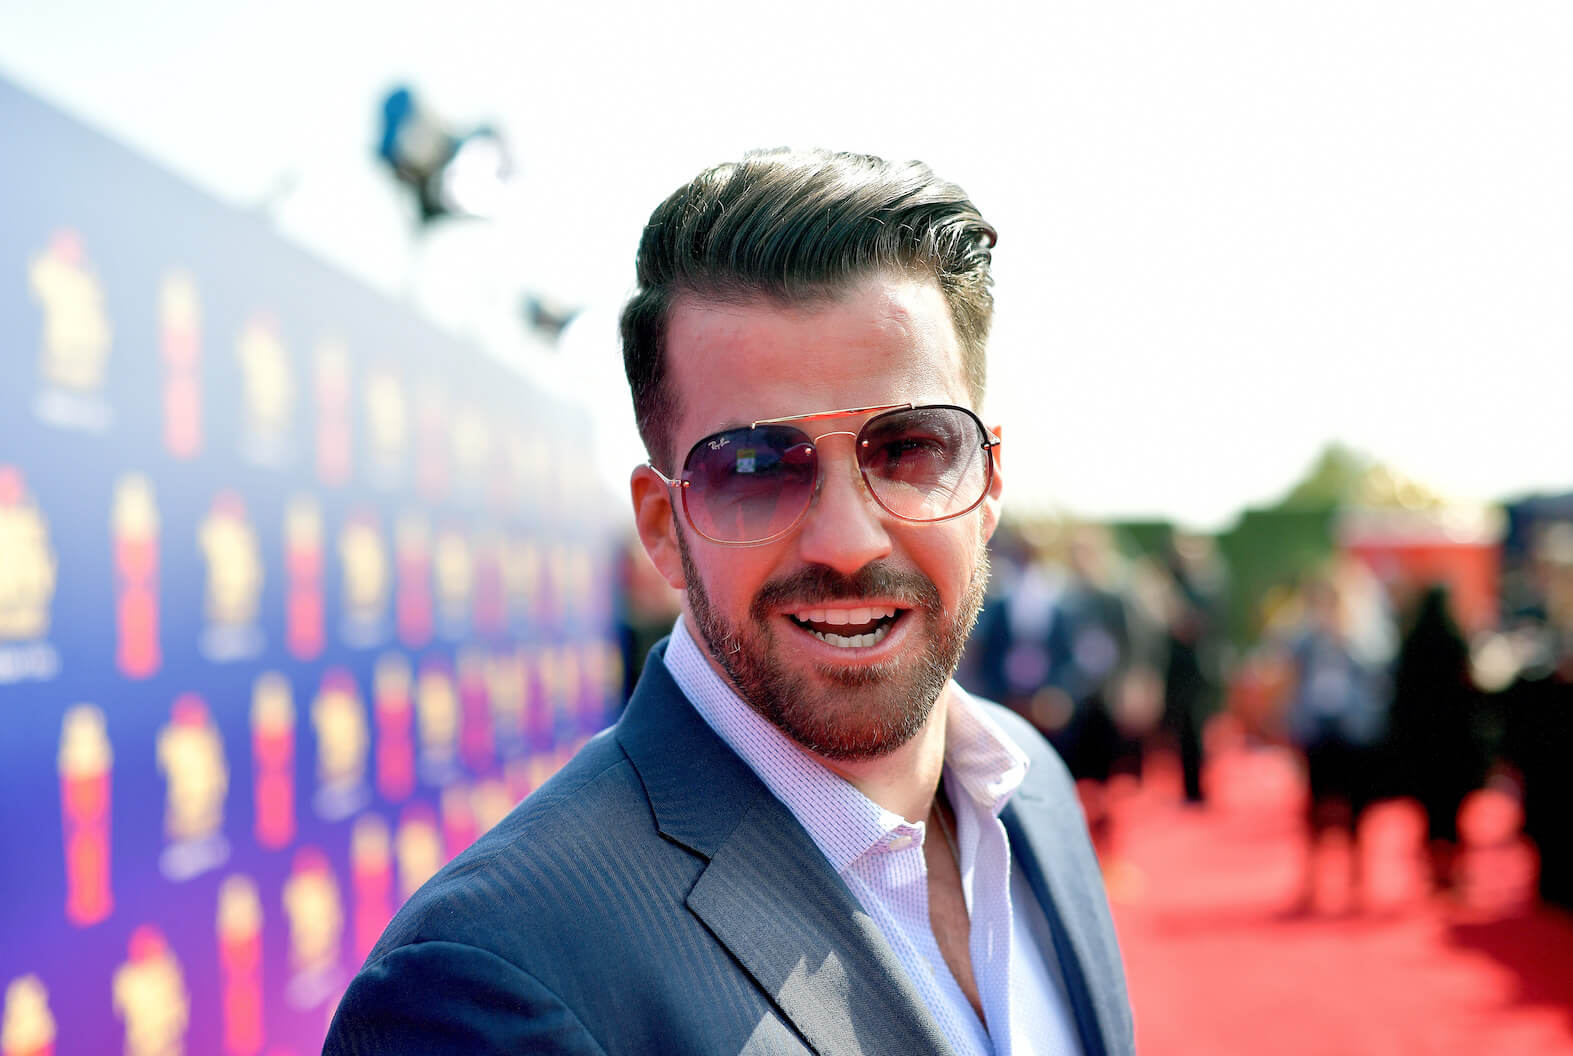 Johnny 'Bananas' Devenanzio from MTV's 'The Challenge' on the red carpet in a suit